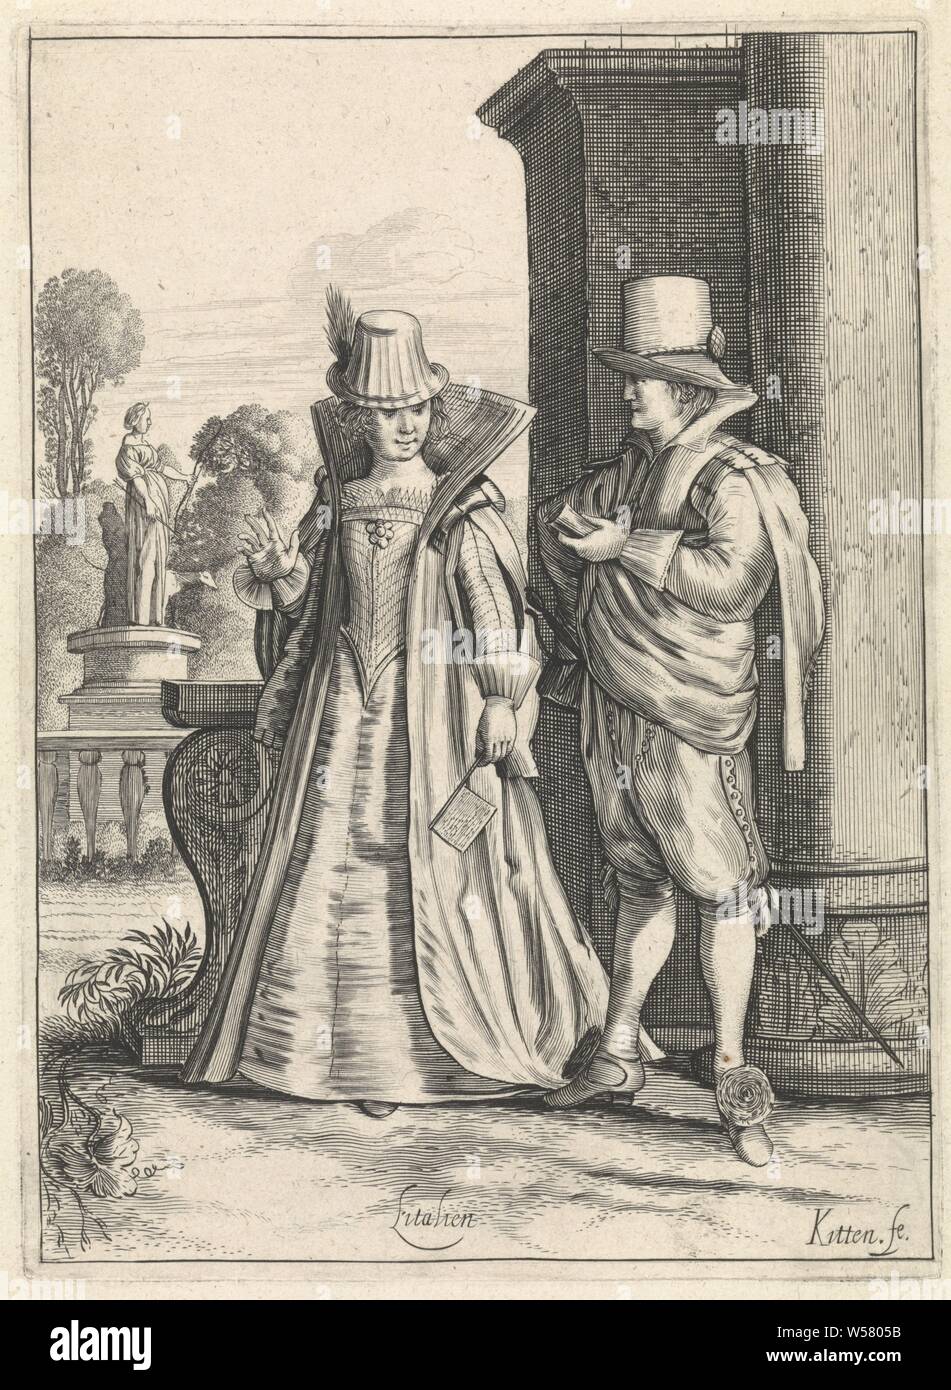 Elegant couple in Italian clothing L 'Italien (title on object) Costumes in  Europe (series title), In front of a column is an elegant pair in Italian  clothing, c. 1620. The woman's robe